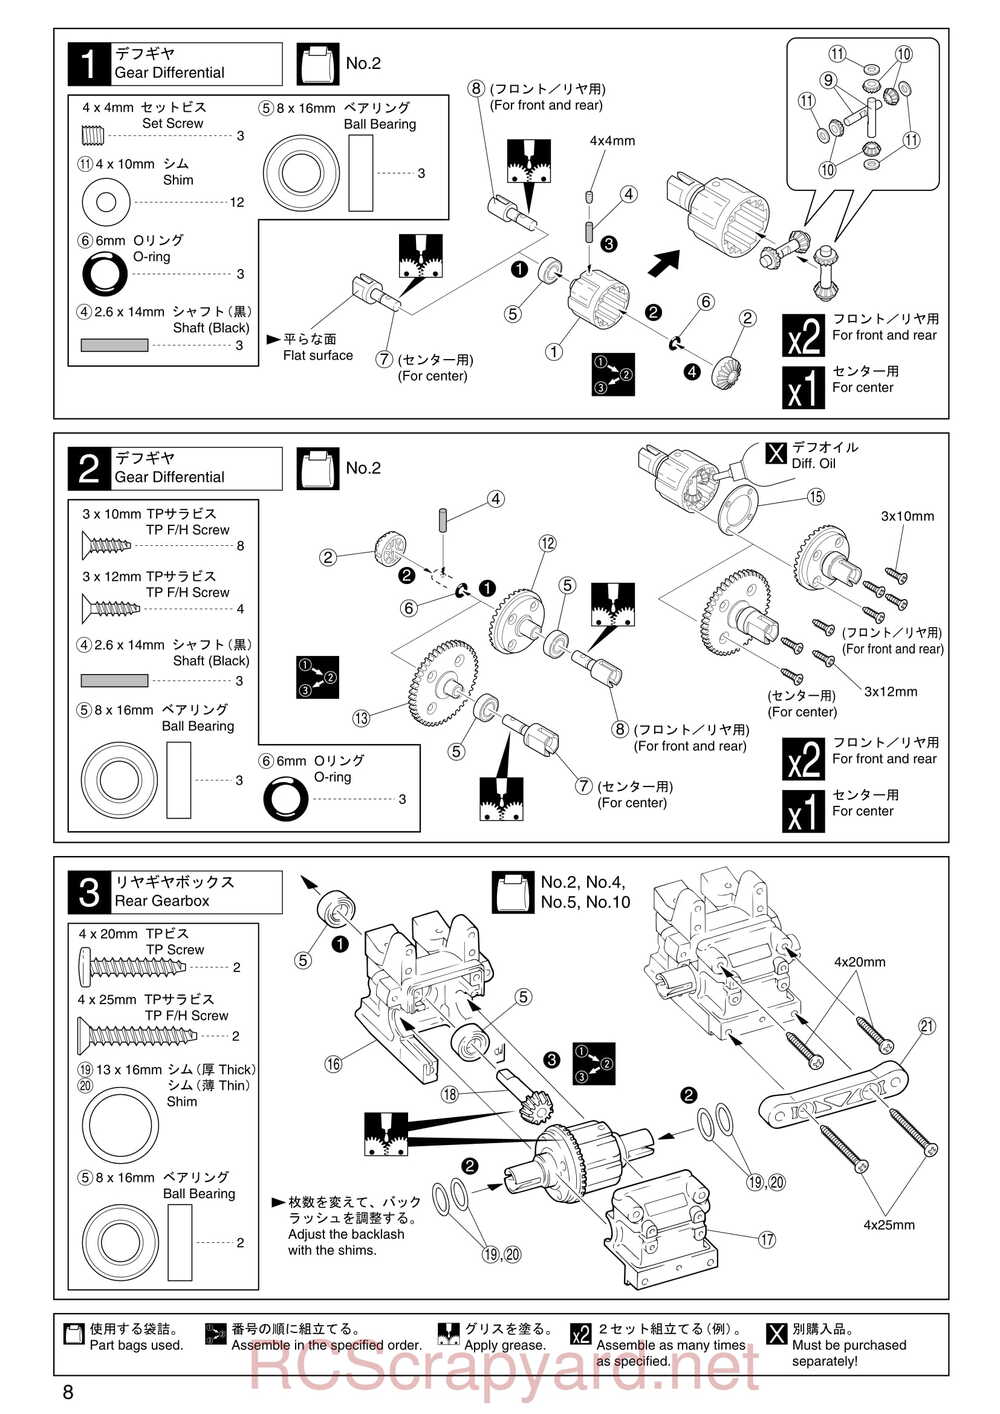 Kyosho - 31081- Inferno-MP-7-5 - Manual - Page 08